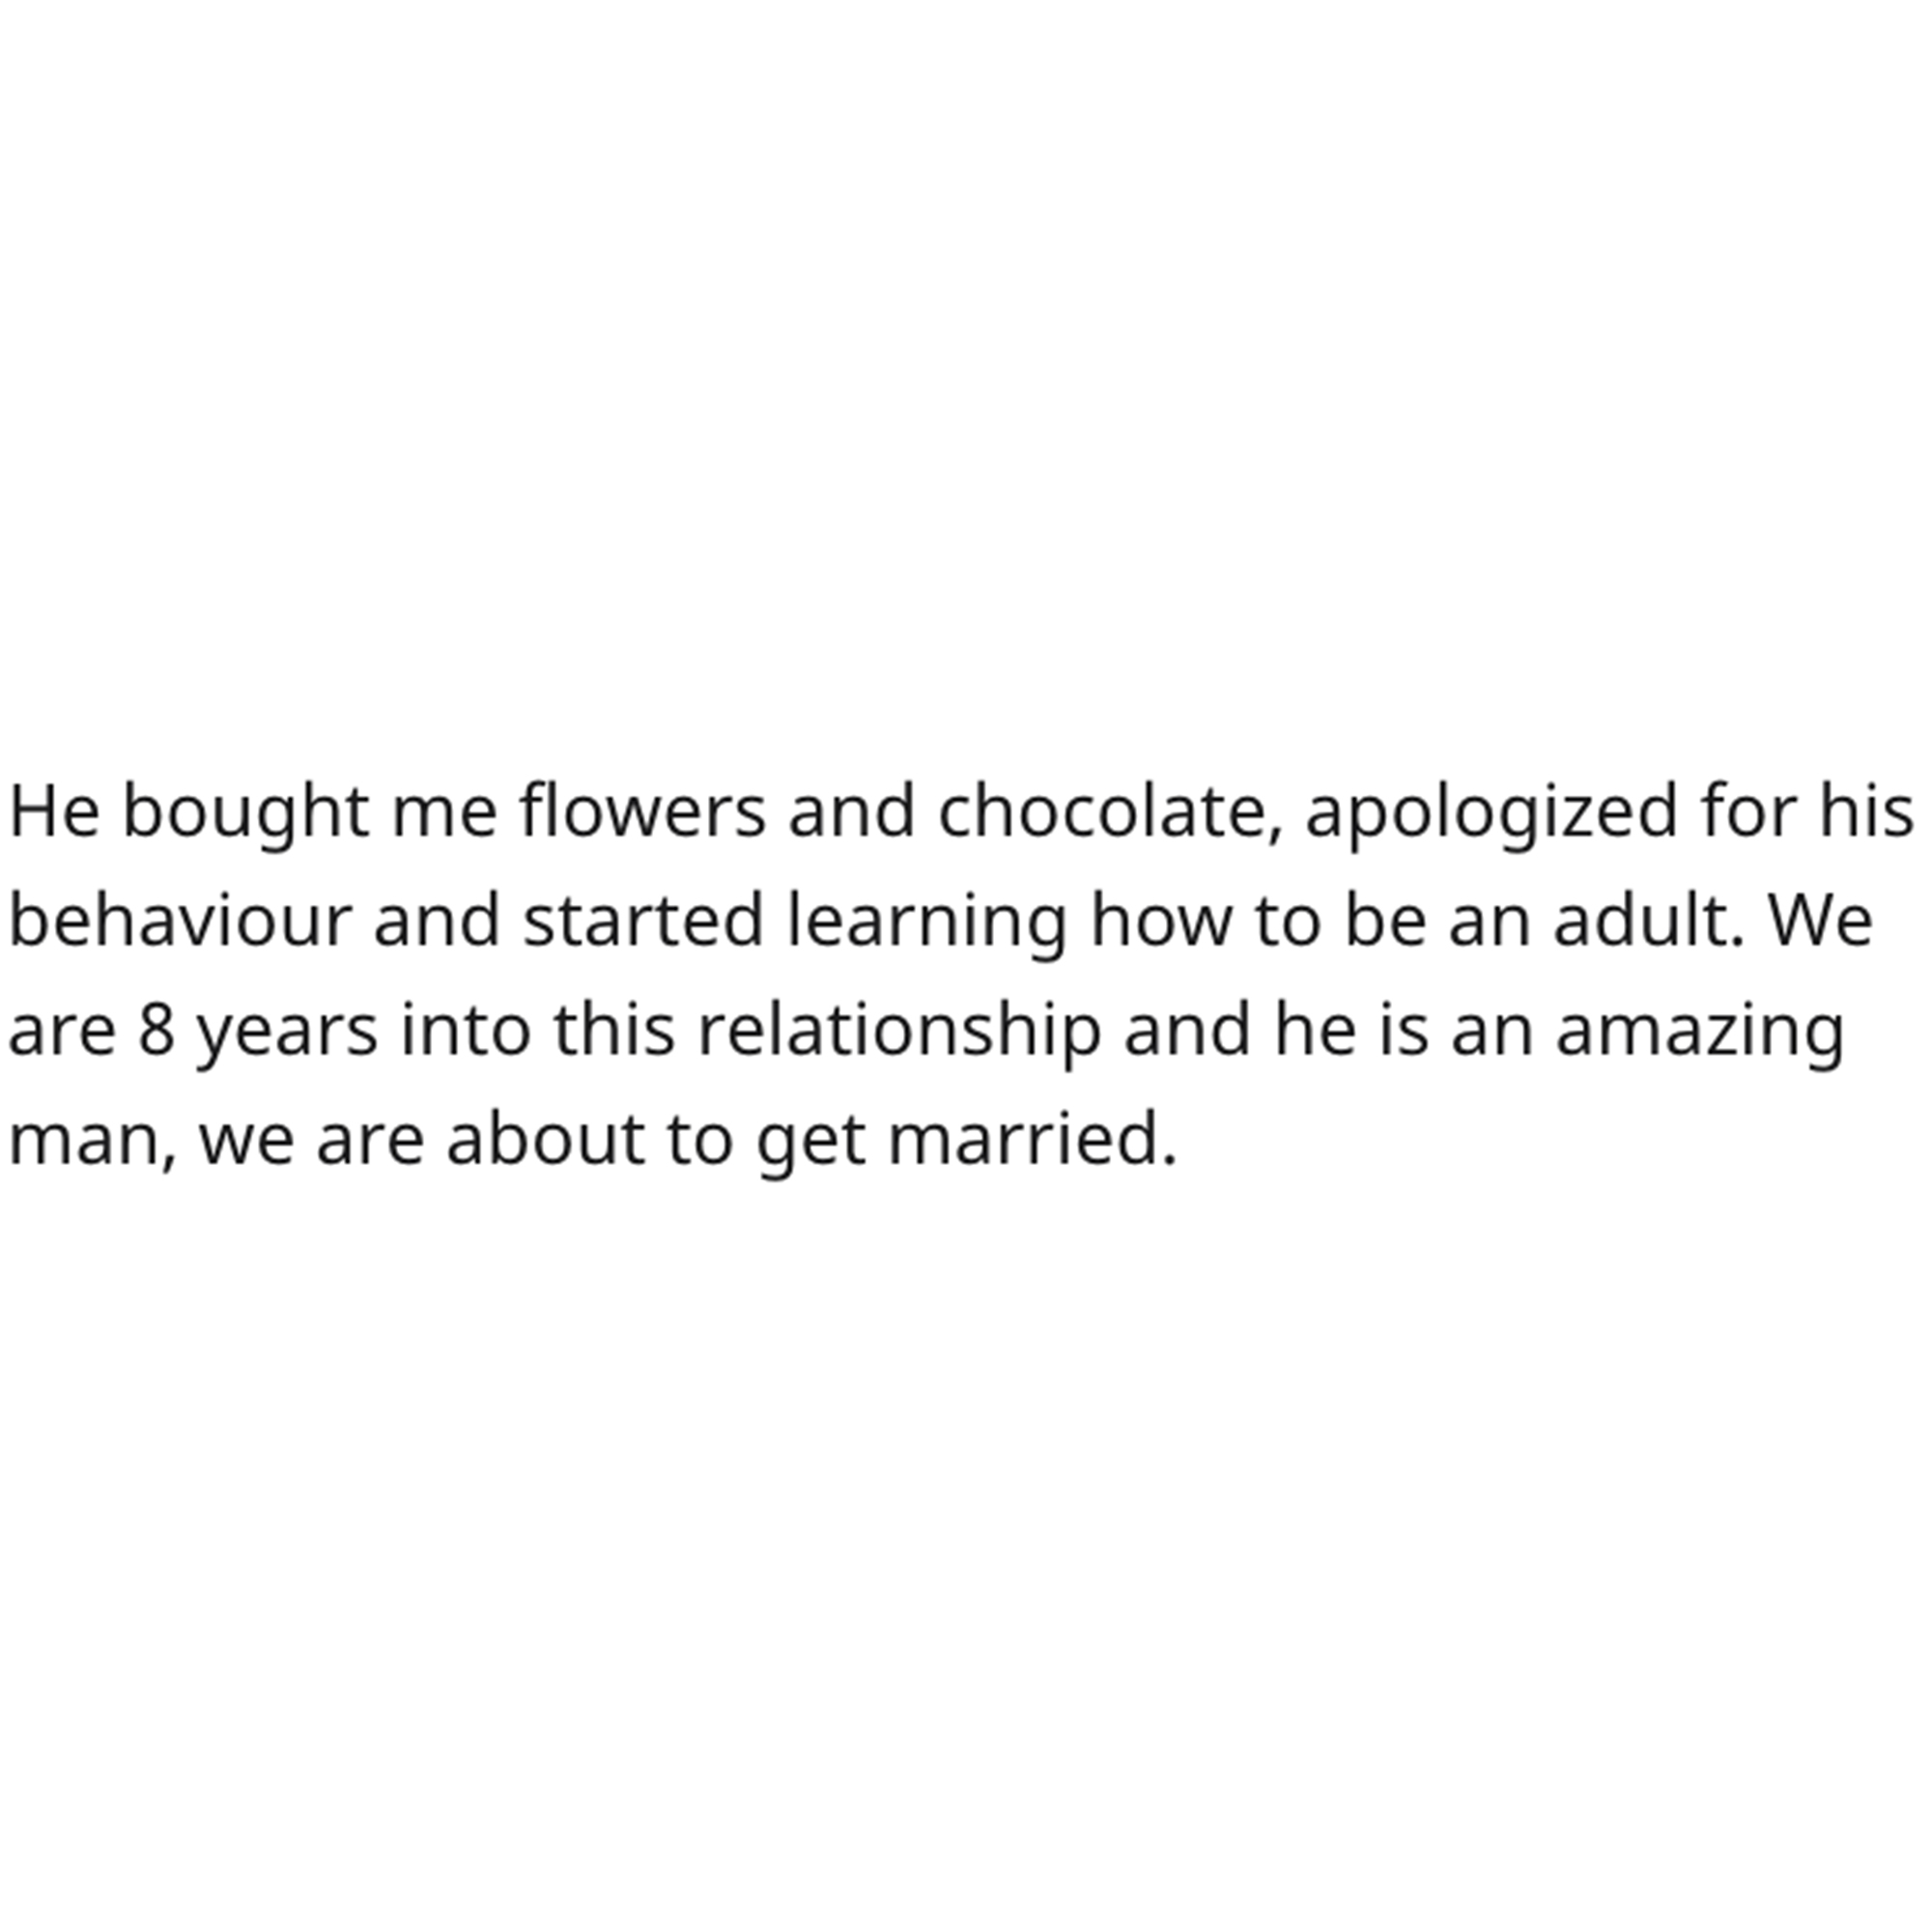 Cleaning Contest Reddit Story - good - He bought me flowers and chocolate, apologized for his behaviour and started learning how to be an adult. We are 8 years into this relationship and he is an amazing man, we are about to get married.